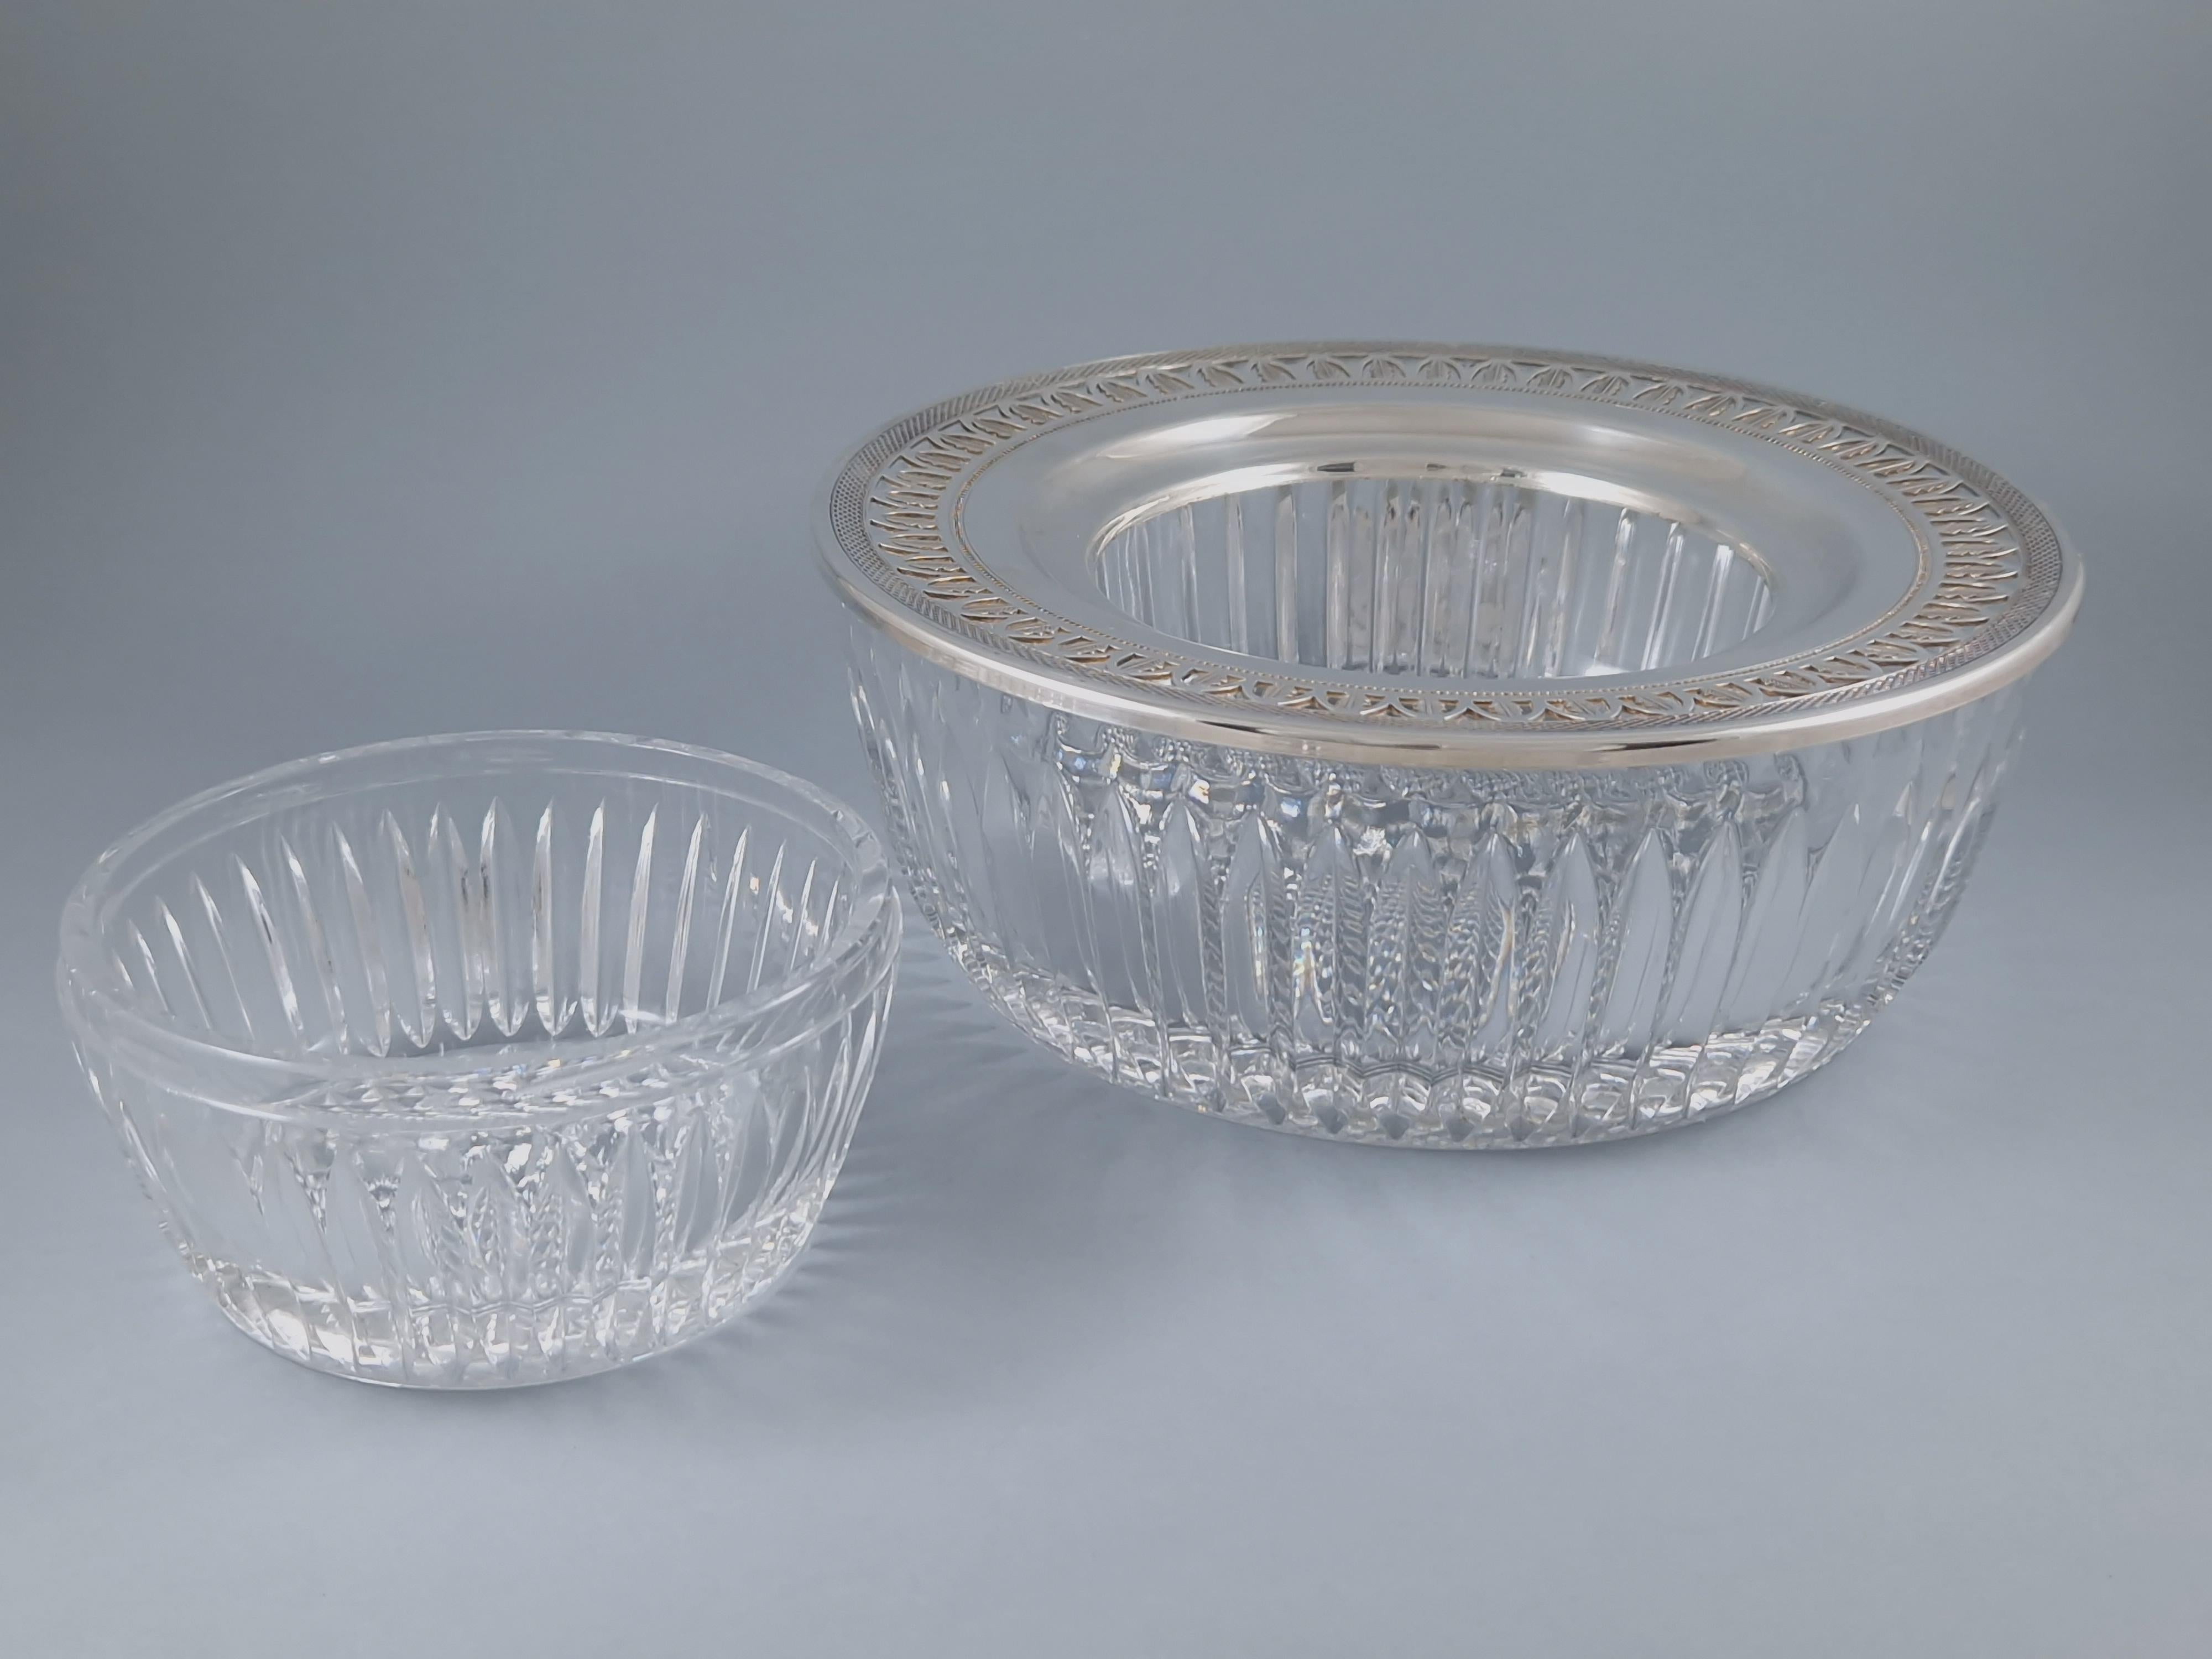 Mid-20th Century Caviar Bowl in Crystal and Silver Plate